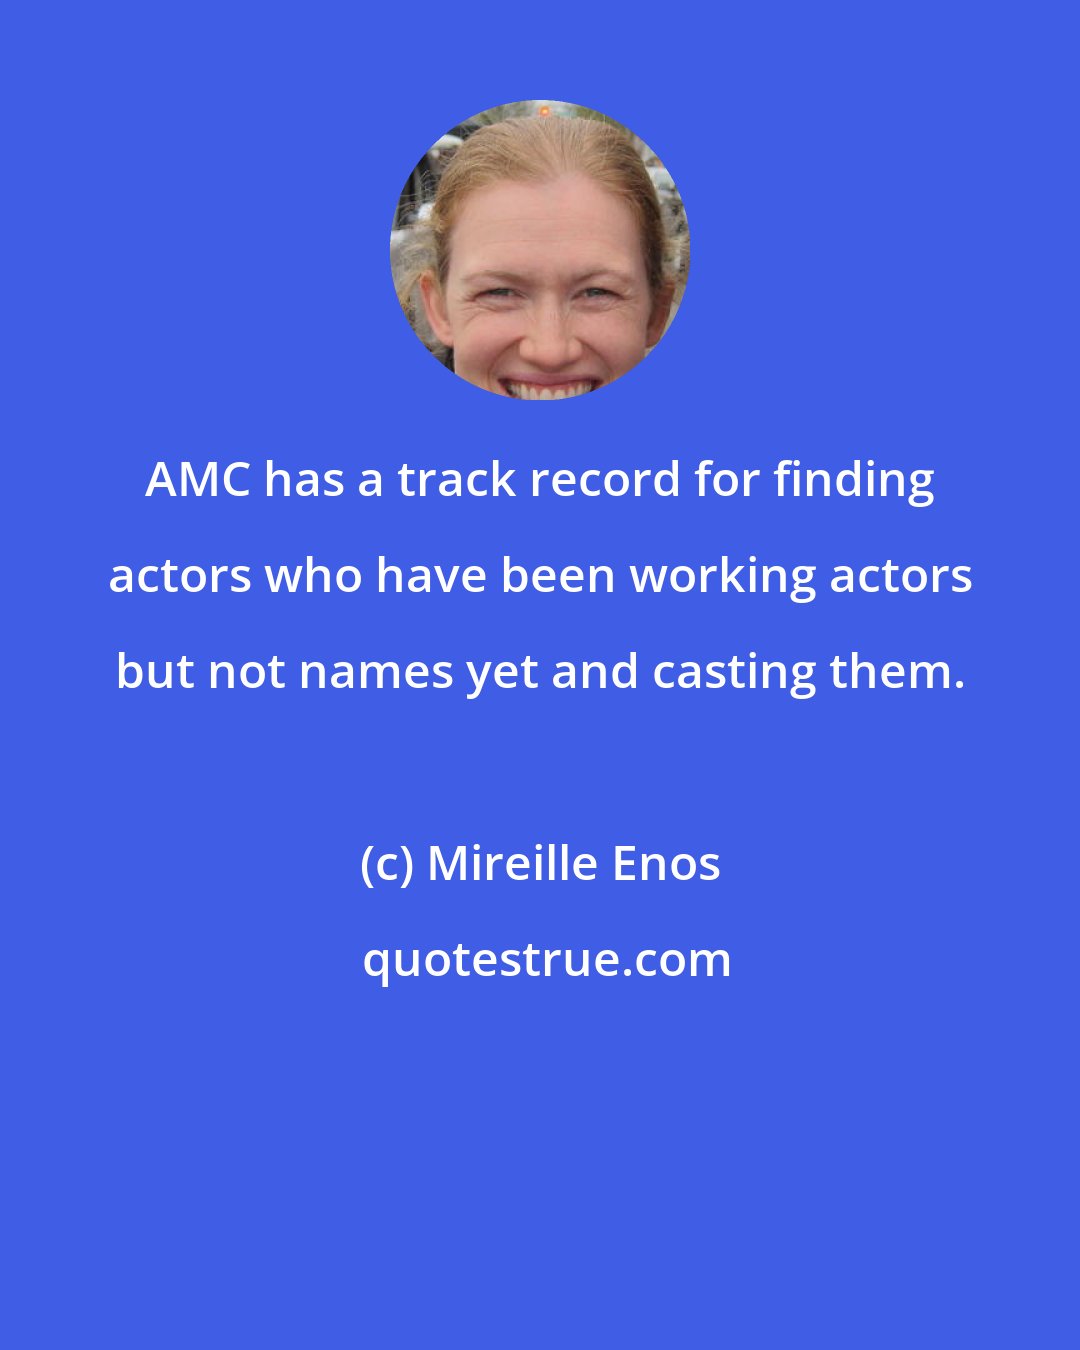 Mireille Enos: AMC has a track record for finding actors who have been working actors but not names yet and casting them.